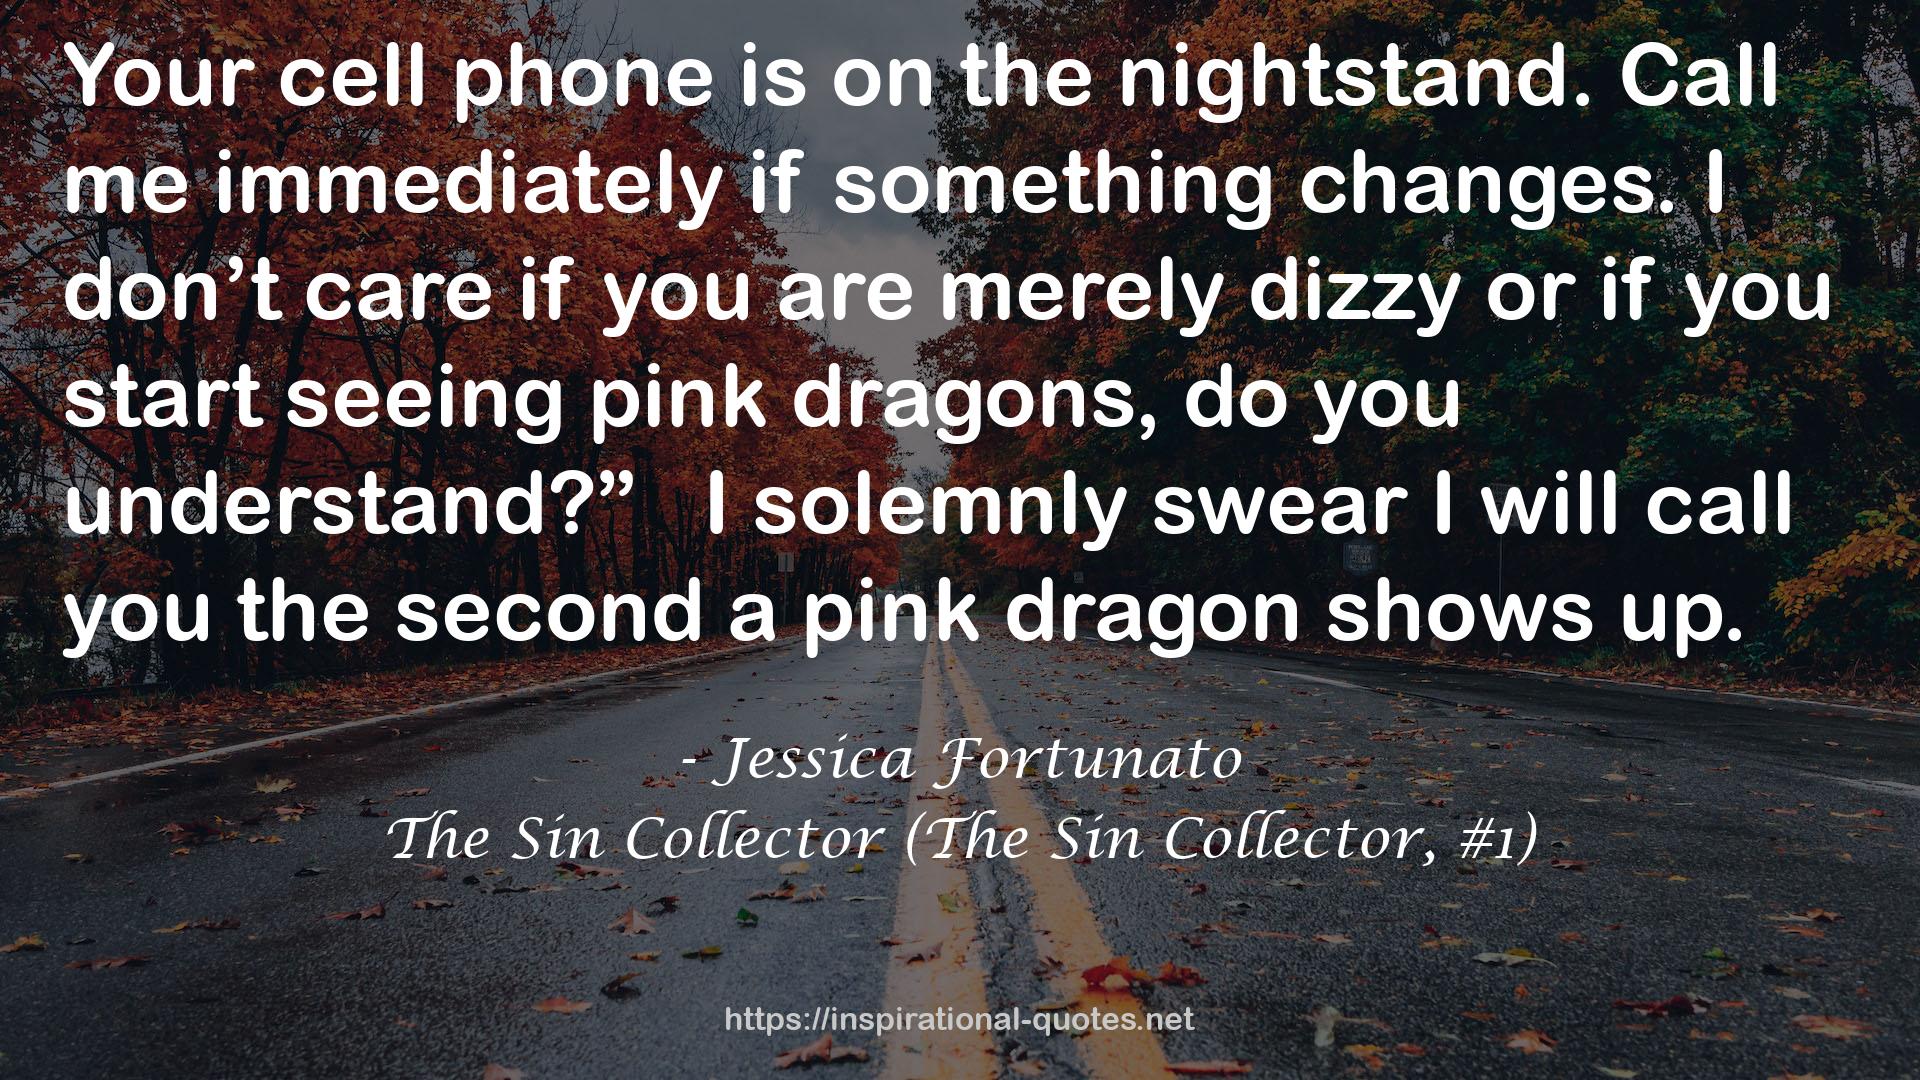 The Sin Collector (The Sin Collector, #1) QUOTES